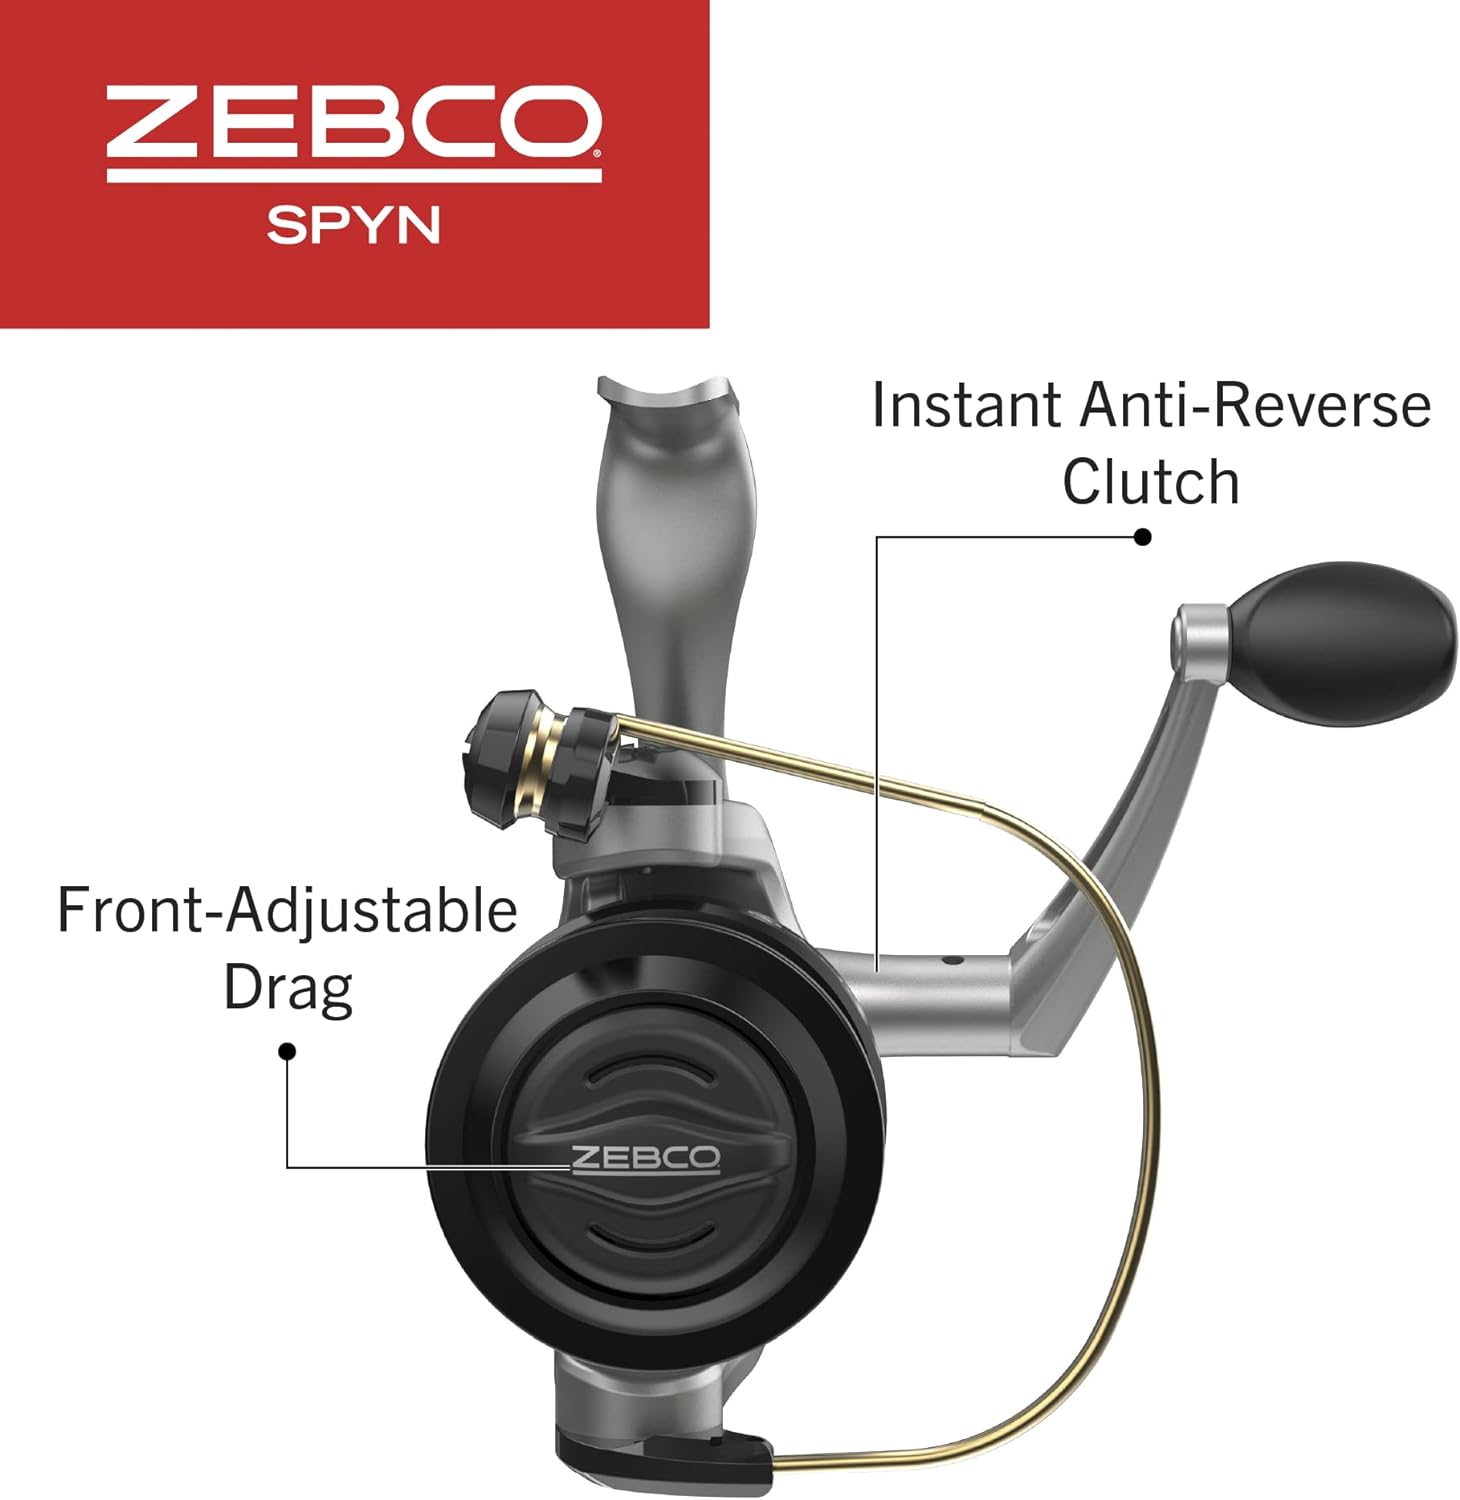 Zebco Spyn Spinning Reel Combo Review